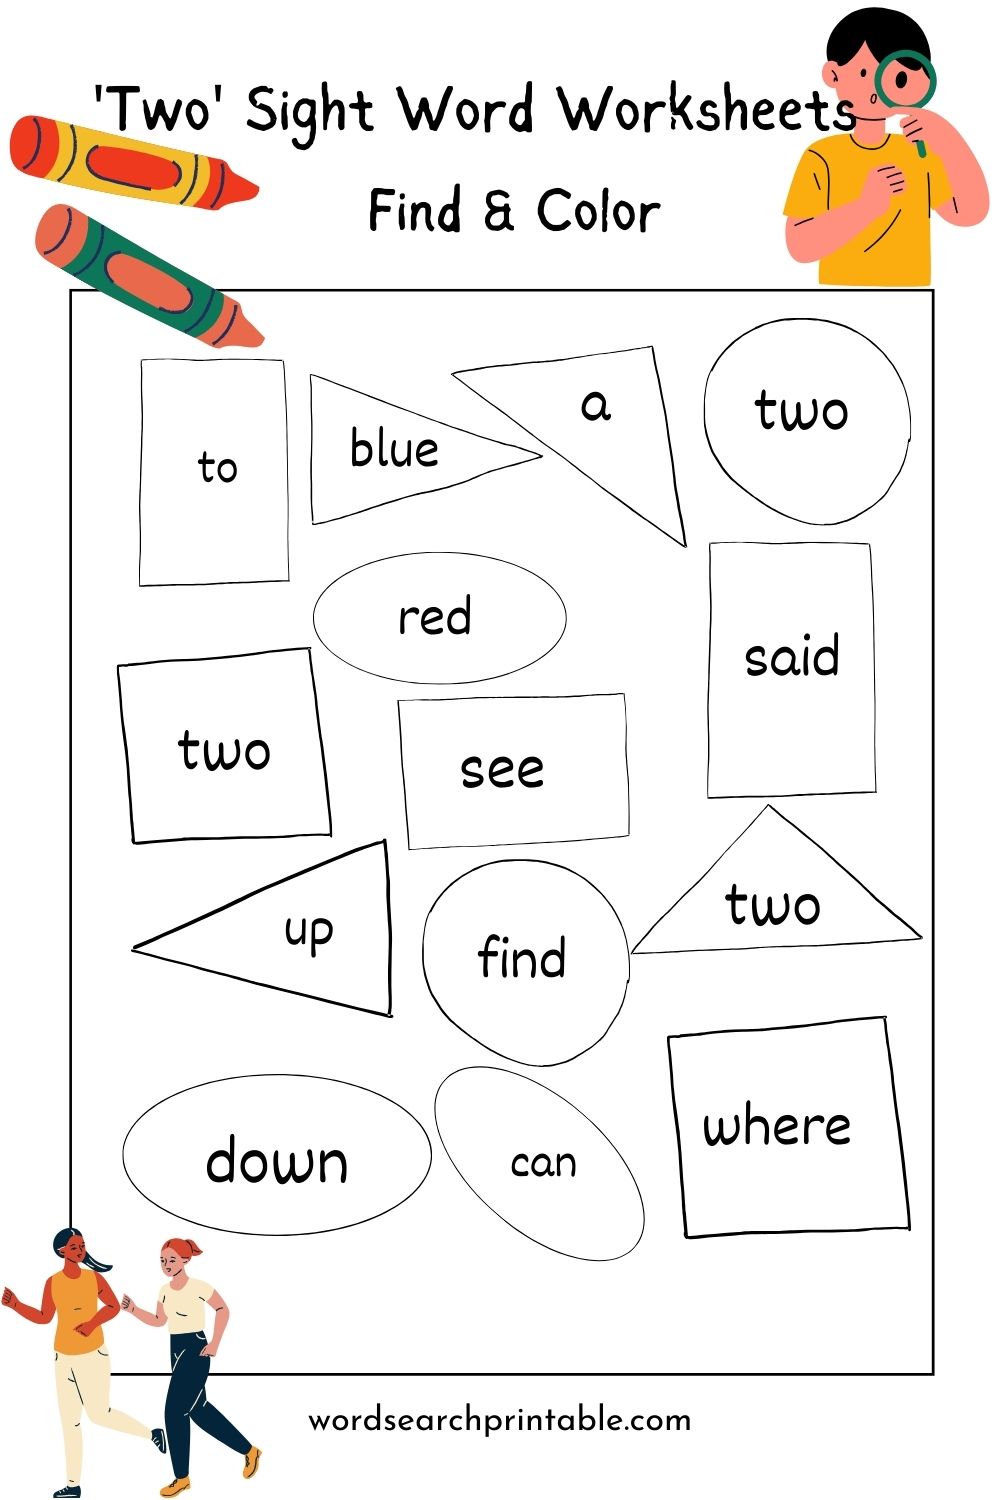 Find sight word Two and Color the geometric shape - Word hunt